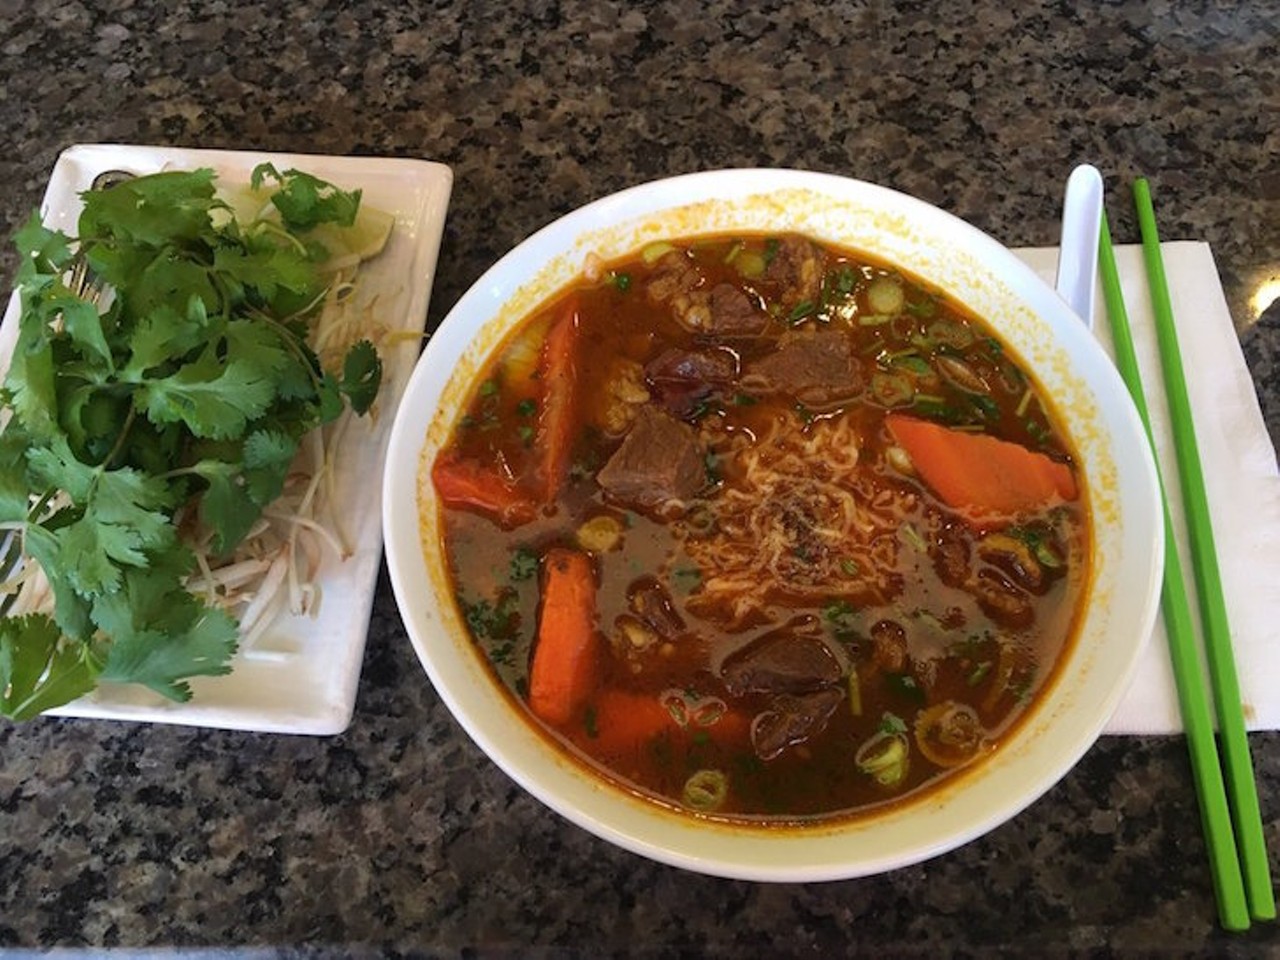 Beef stew with egg noodles
Anh Hong, 1124 E. Colonial Drive
Photo via Yelp